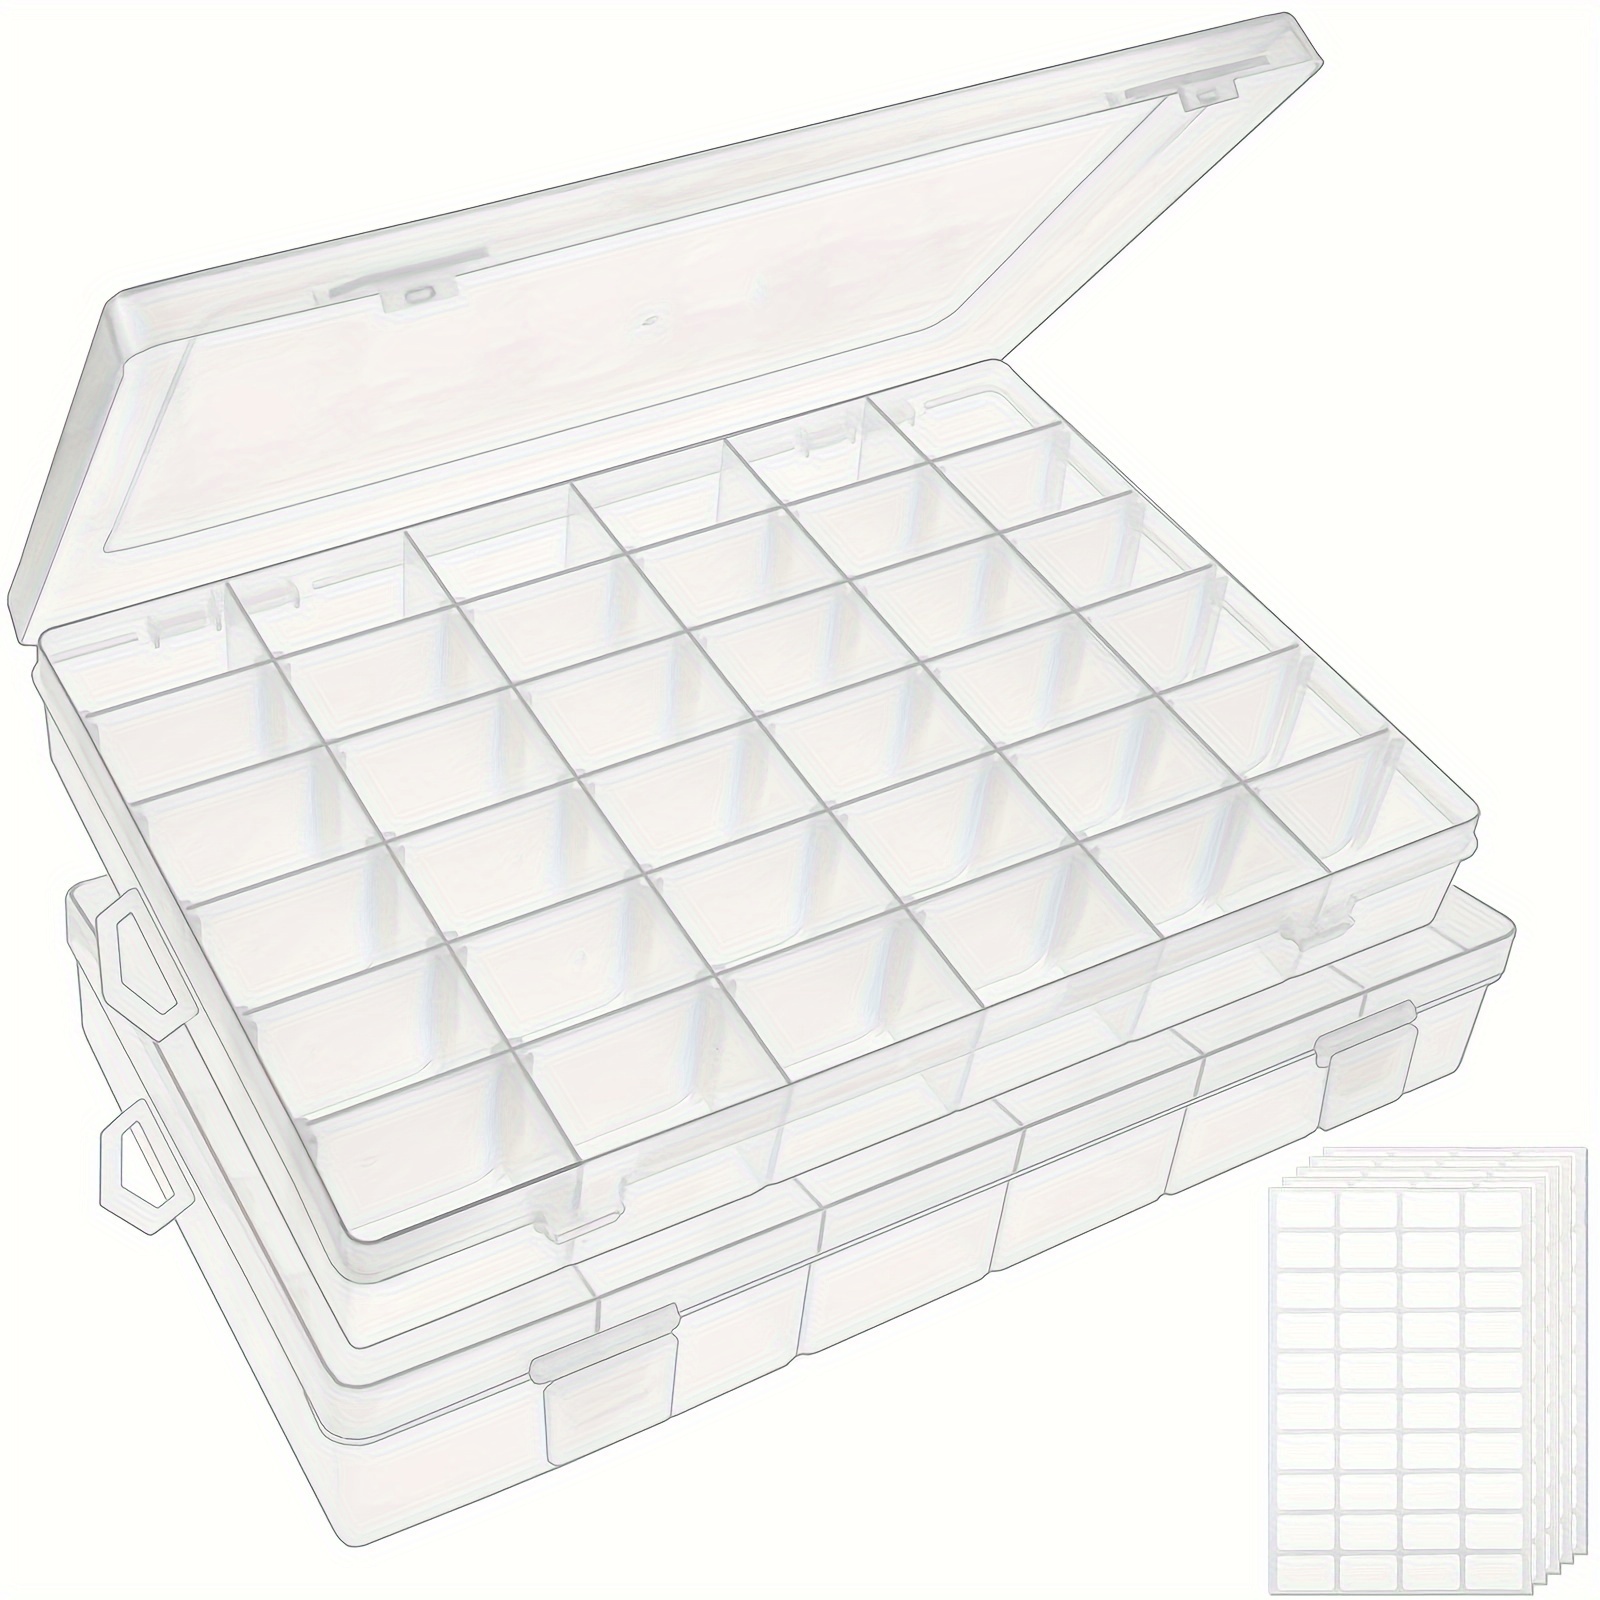 

1 Box 36 Girds Transparent Plastic Storage Box With Adjustable Partition, Jewelry Storage Sorting Beads, Rock Collection, Fishing Gear, Tape Lines Practical Convenient Supplies 10.8x7x1.8 Inches